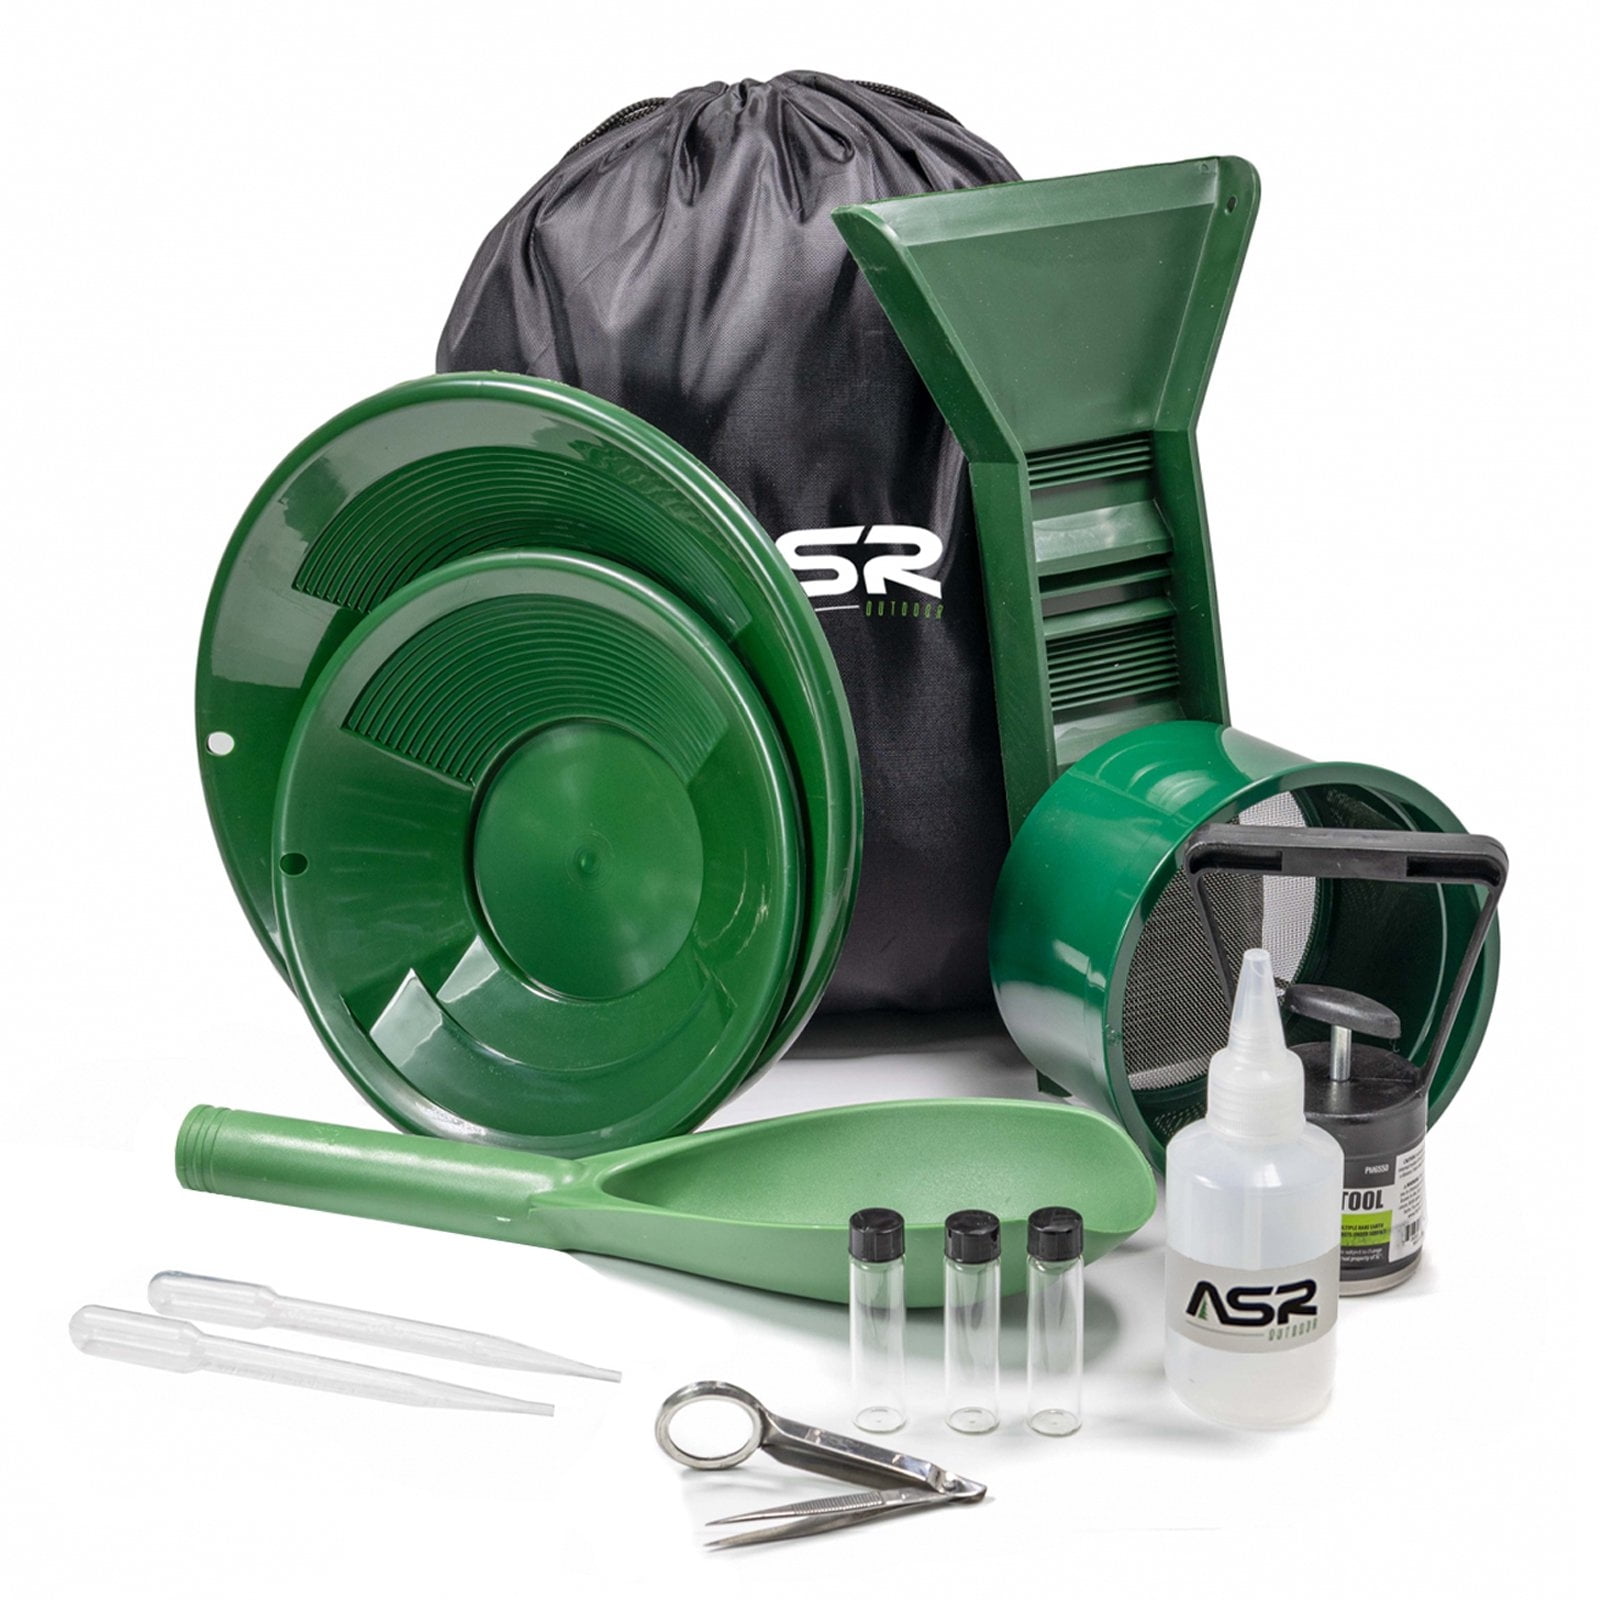  Sluice Monkey 12 Green & Black Gold Pan Panning Kit with  Sniffer & Vial : Patio, Lawn & Garden